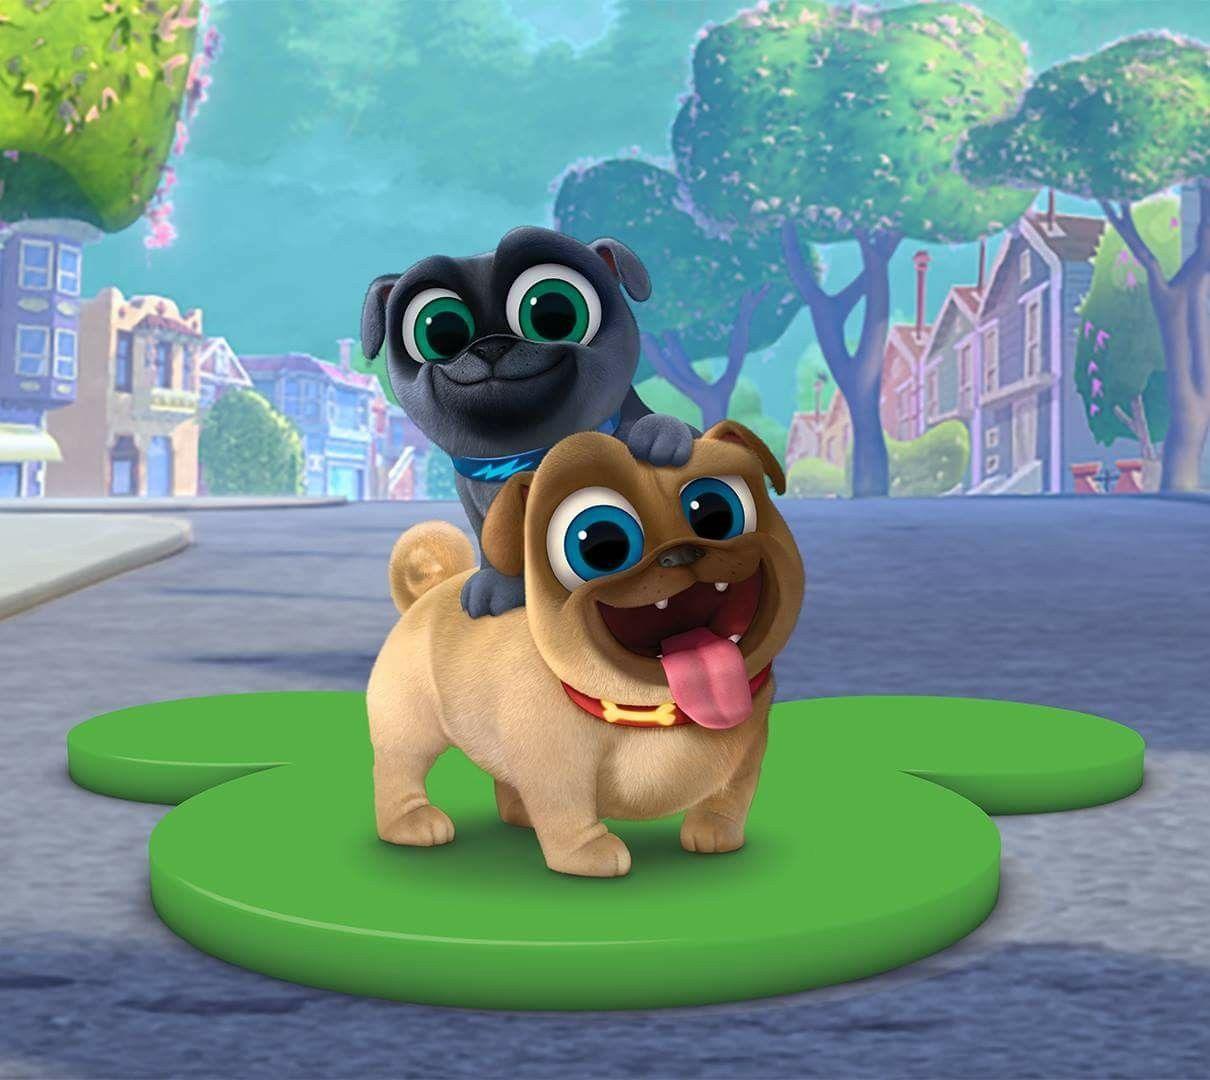 Puppy Dog Pals Wallpapers - Top Free Puppy Dog Pals Backgrounds